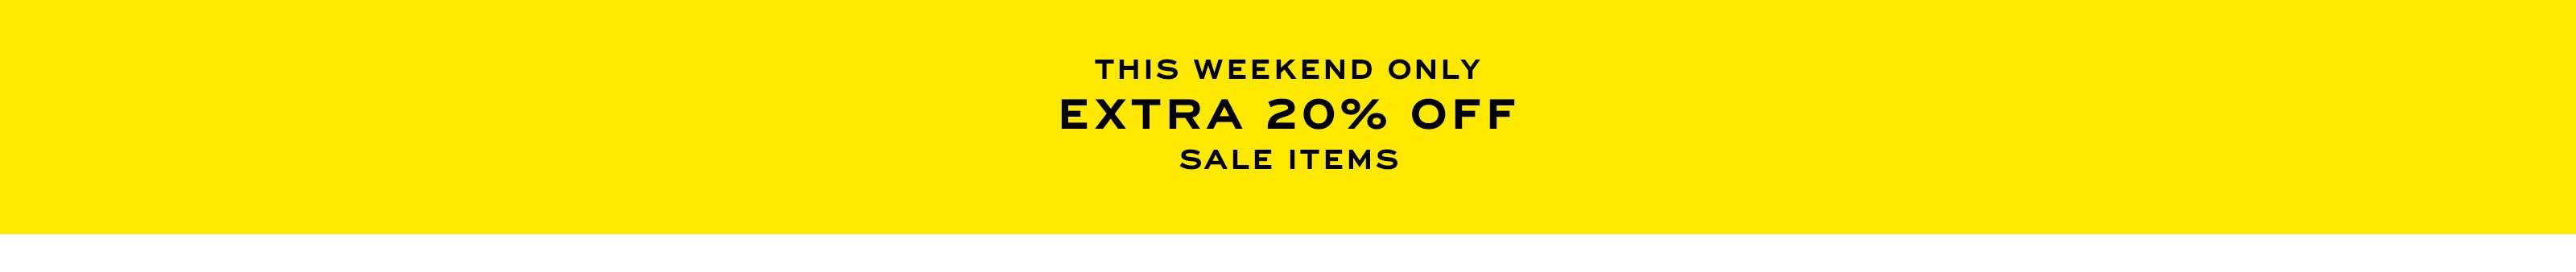 This Weekend Only Extra 20% Off Sale Items